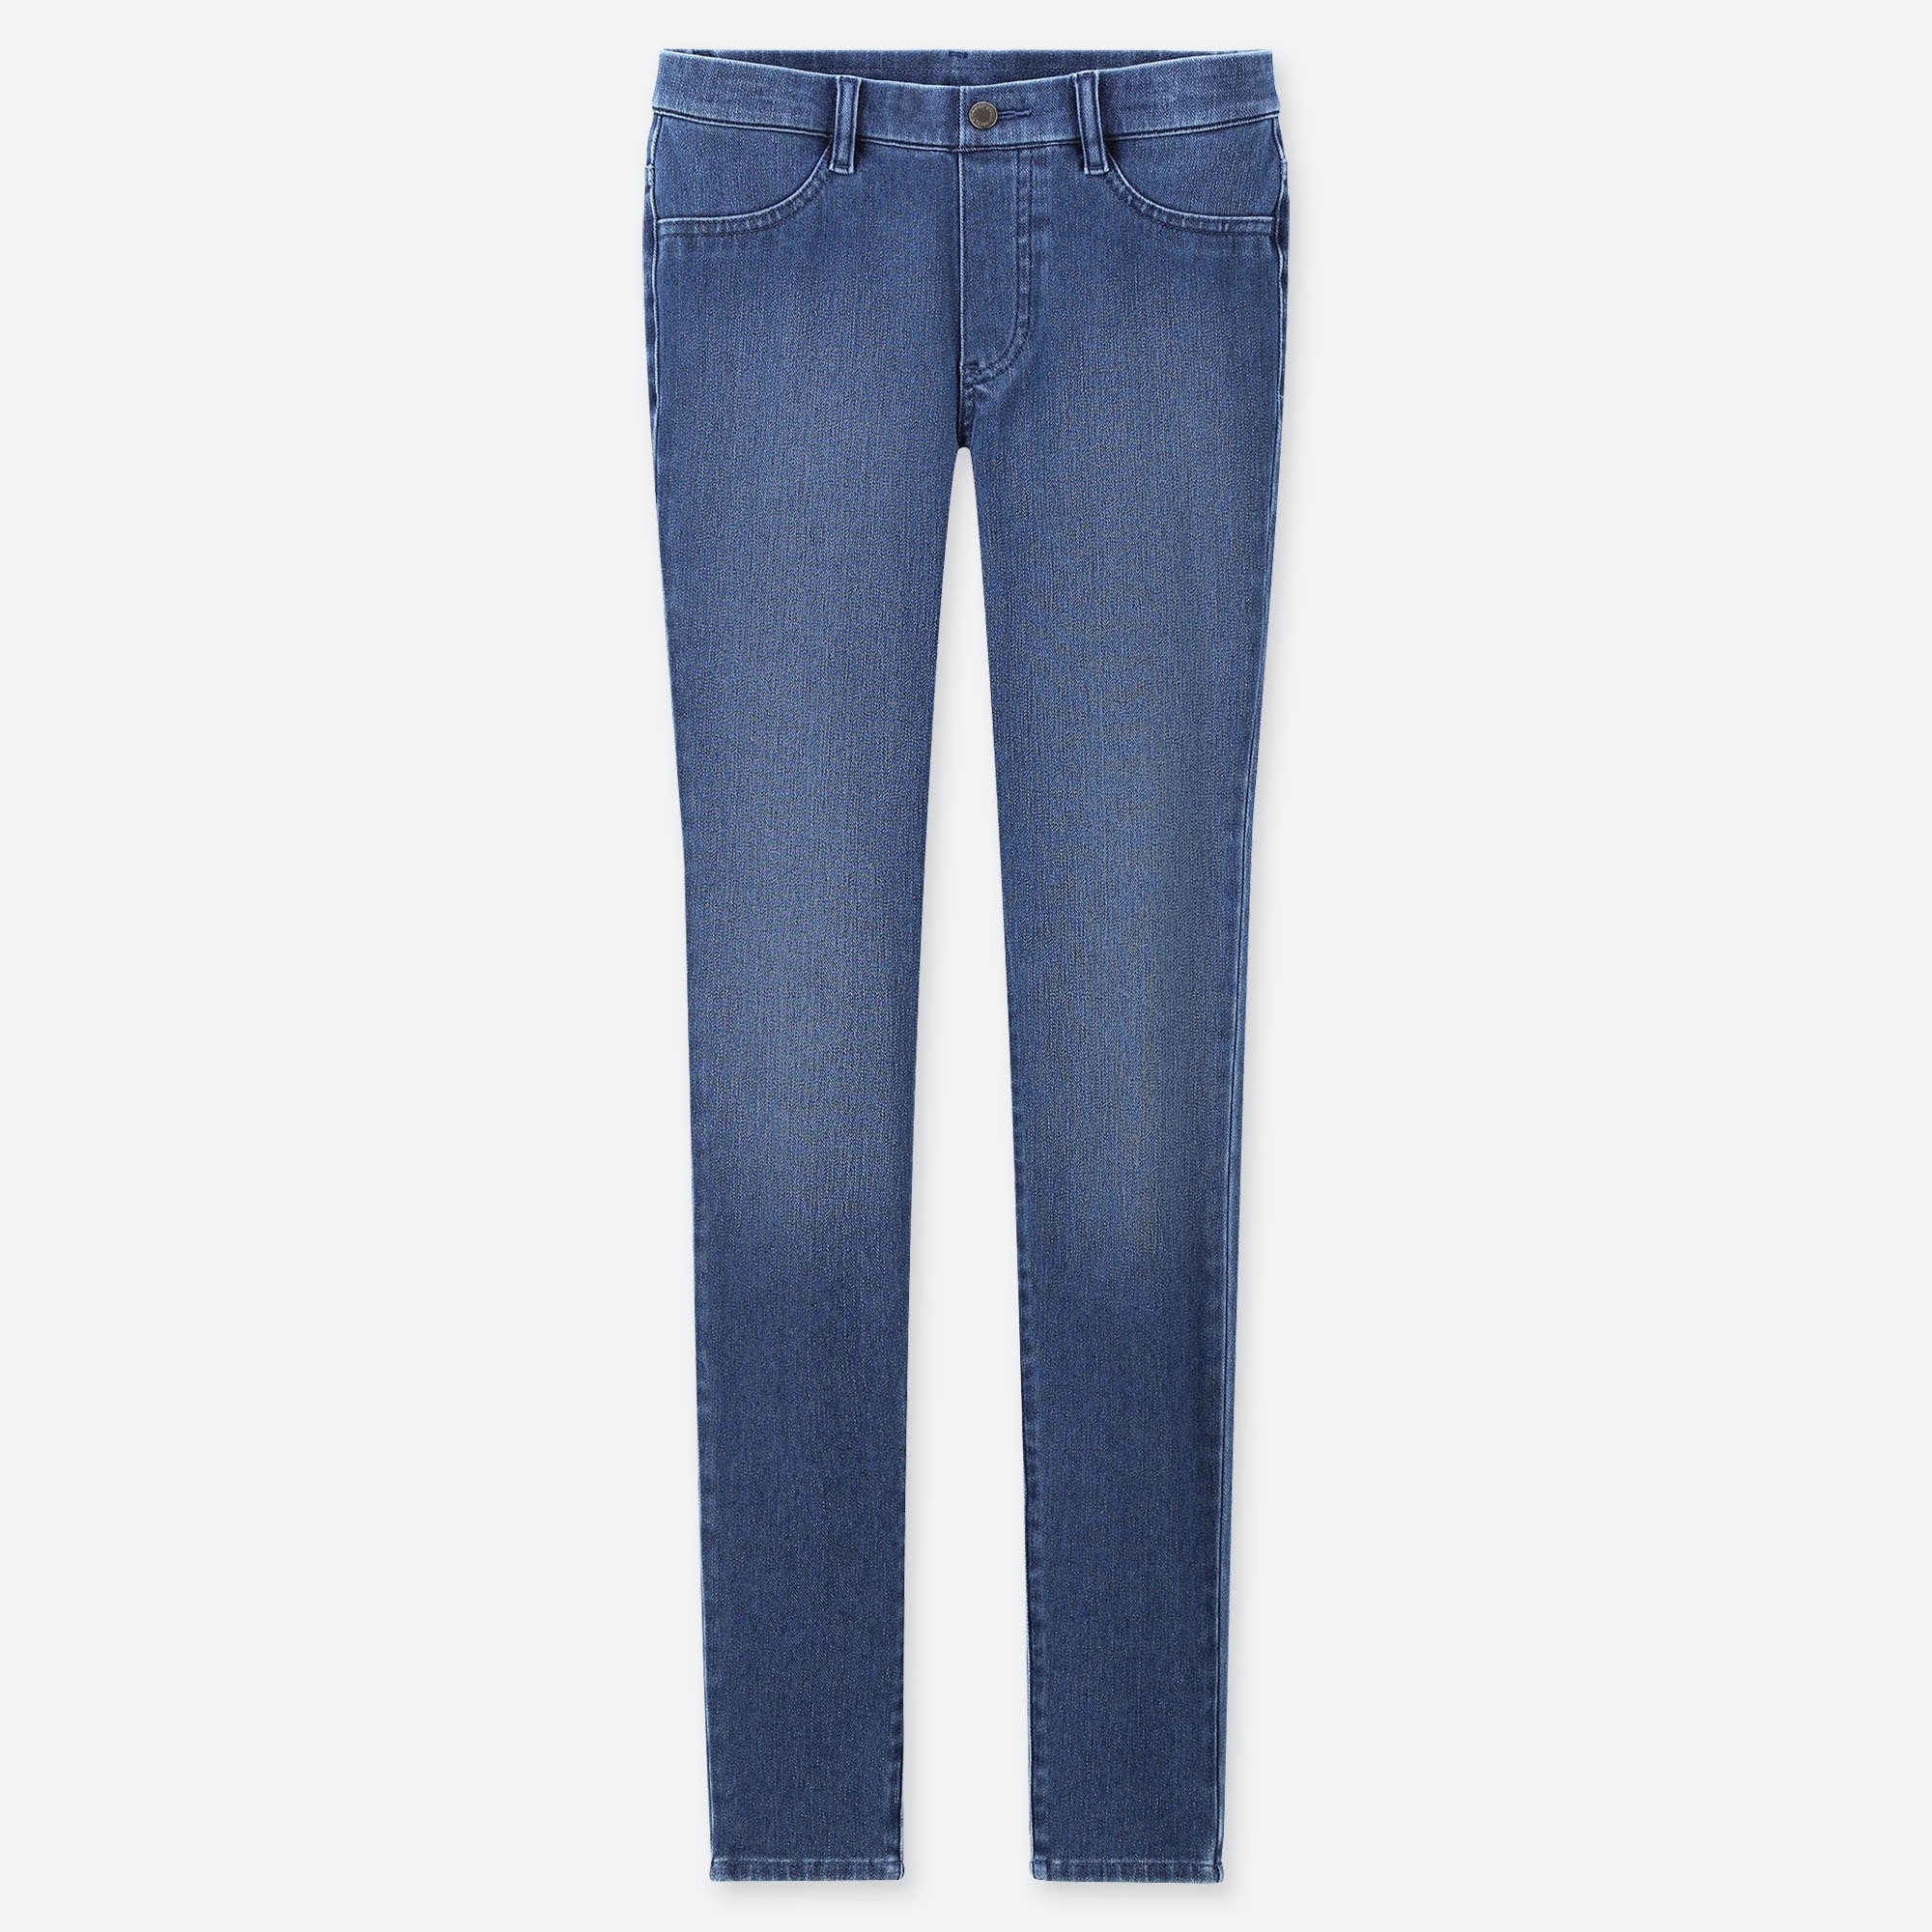 Jem - Enjoy limited offer for UNIQLO Men's Slim Fit Jeans and Women's  Cropped Leggings Pants